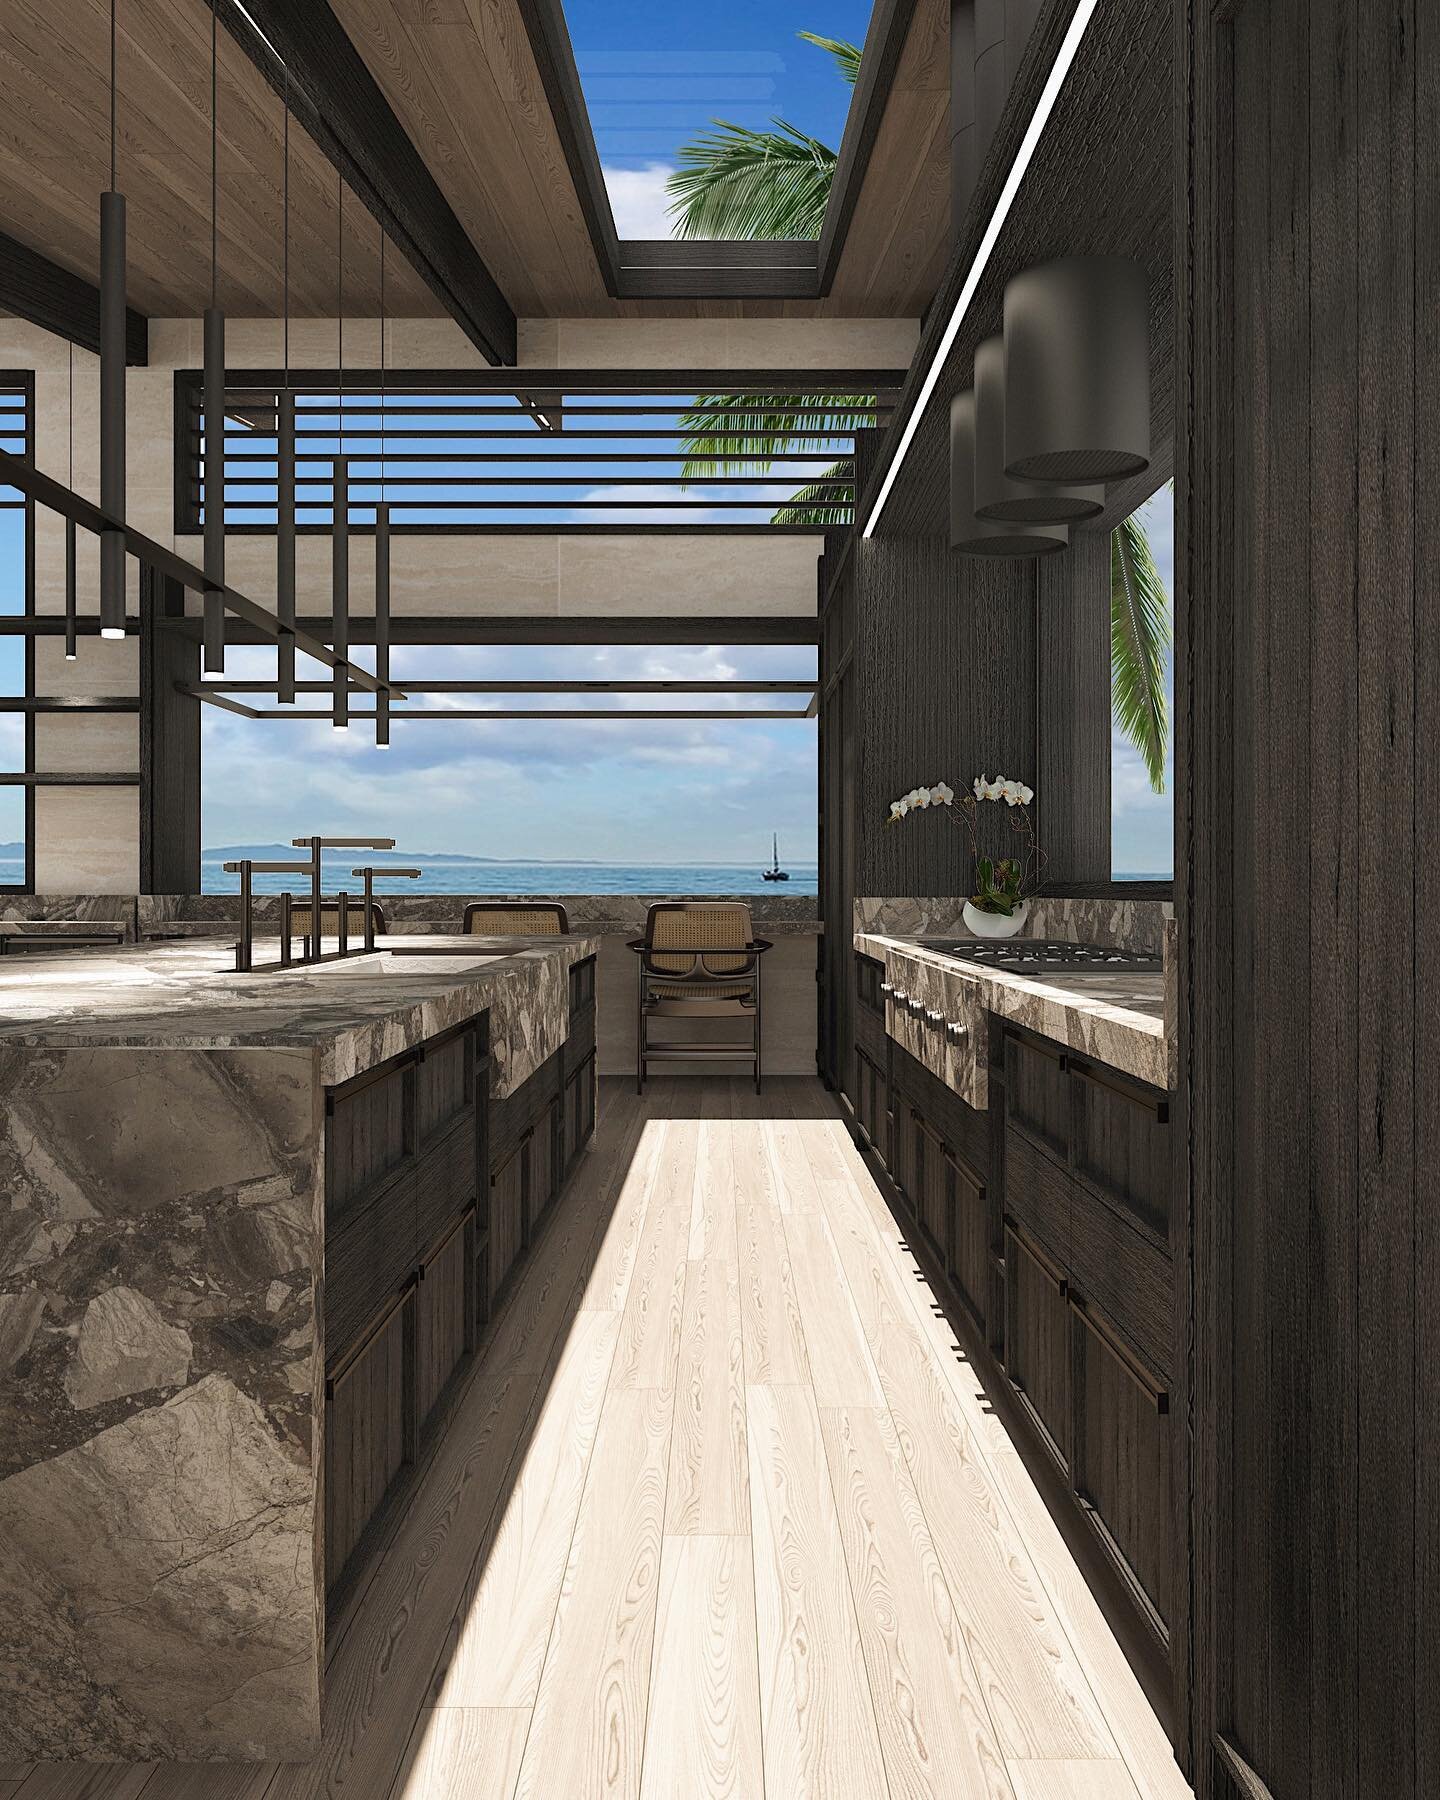 I&rsquo;m really excited to share a fun fantasy project I&rsquo;ve been working on for a few months now&hellip;

P1 - a bespoke kitchen somewhere in Hawai&rsquo;i 🏝

&hellip;more to come&hellip;

#designbyjdm